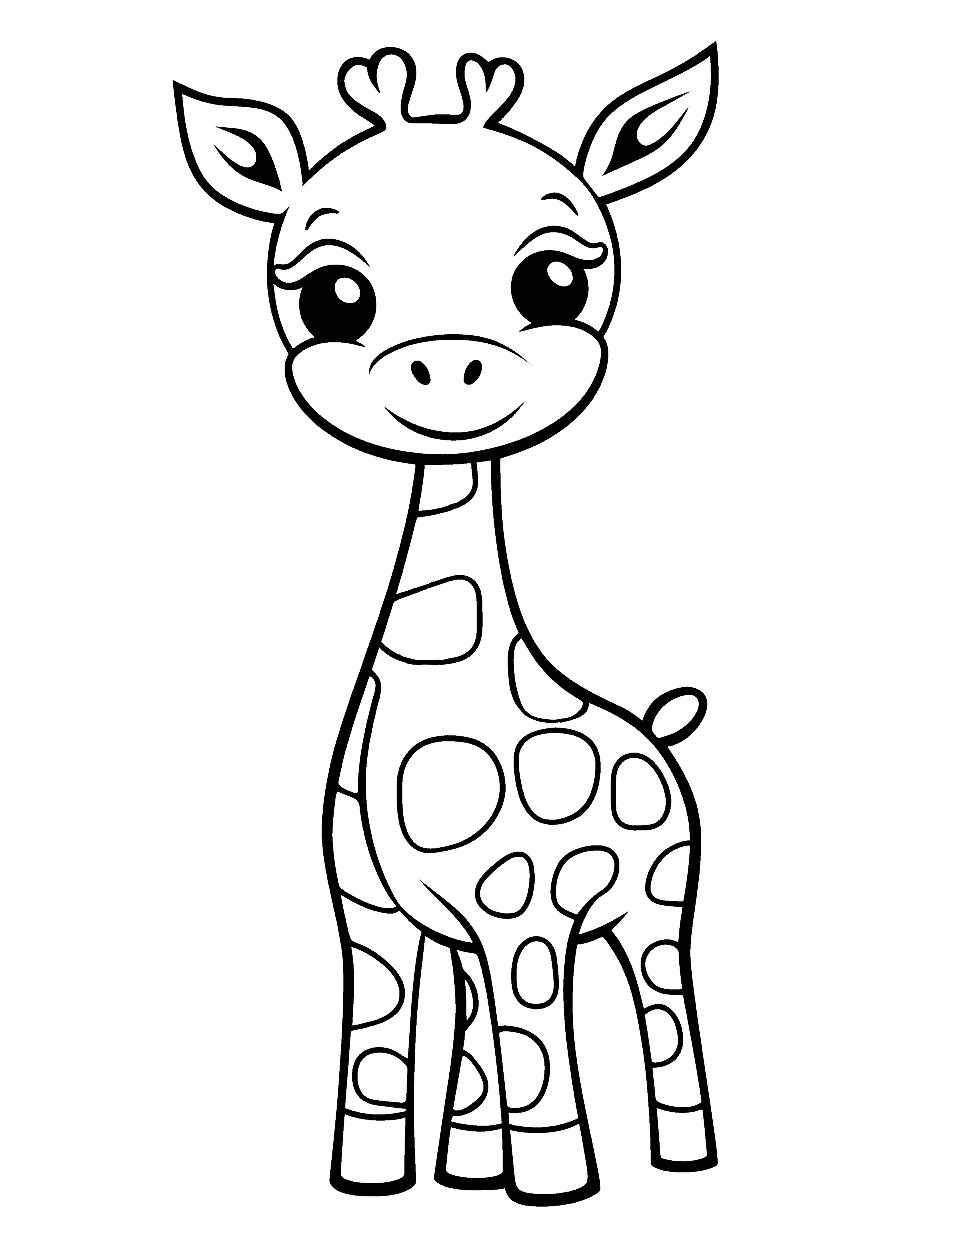 Chibi Giraffe Animal Coloring Page - A cute and chubby giraffe with a big smile on its face.